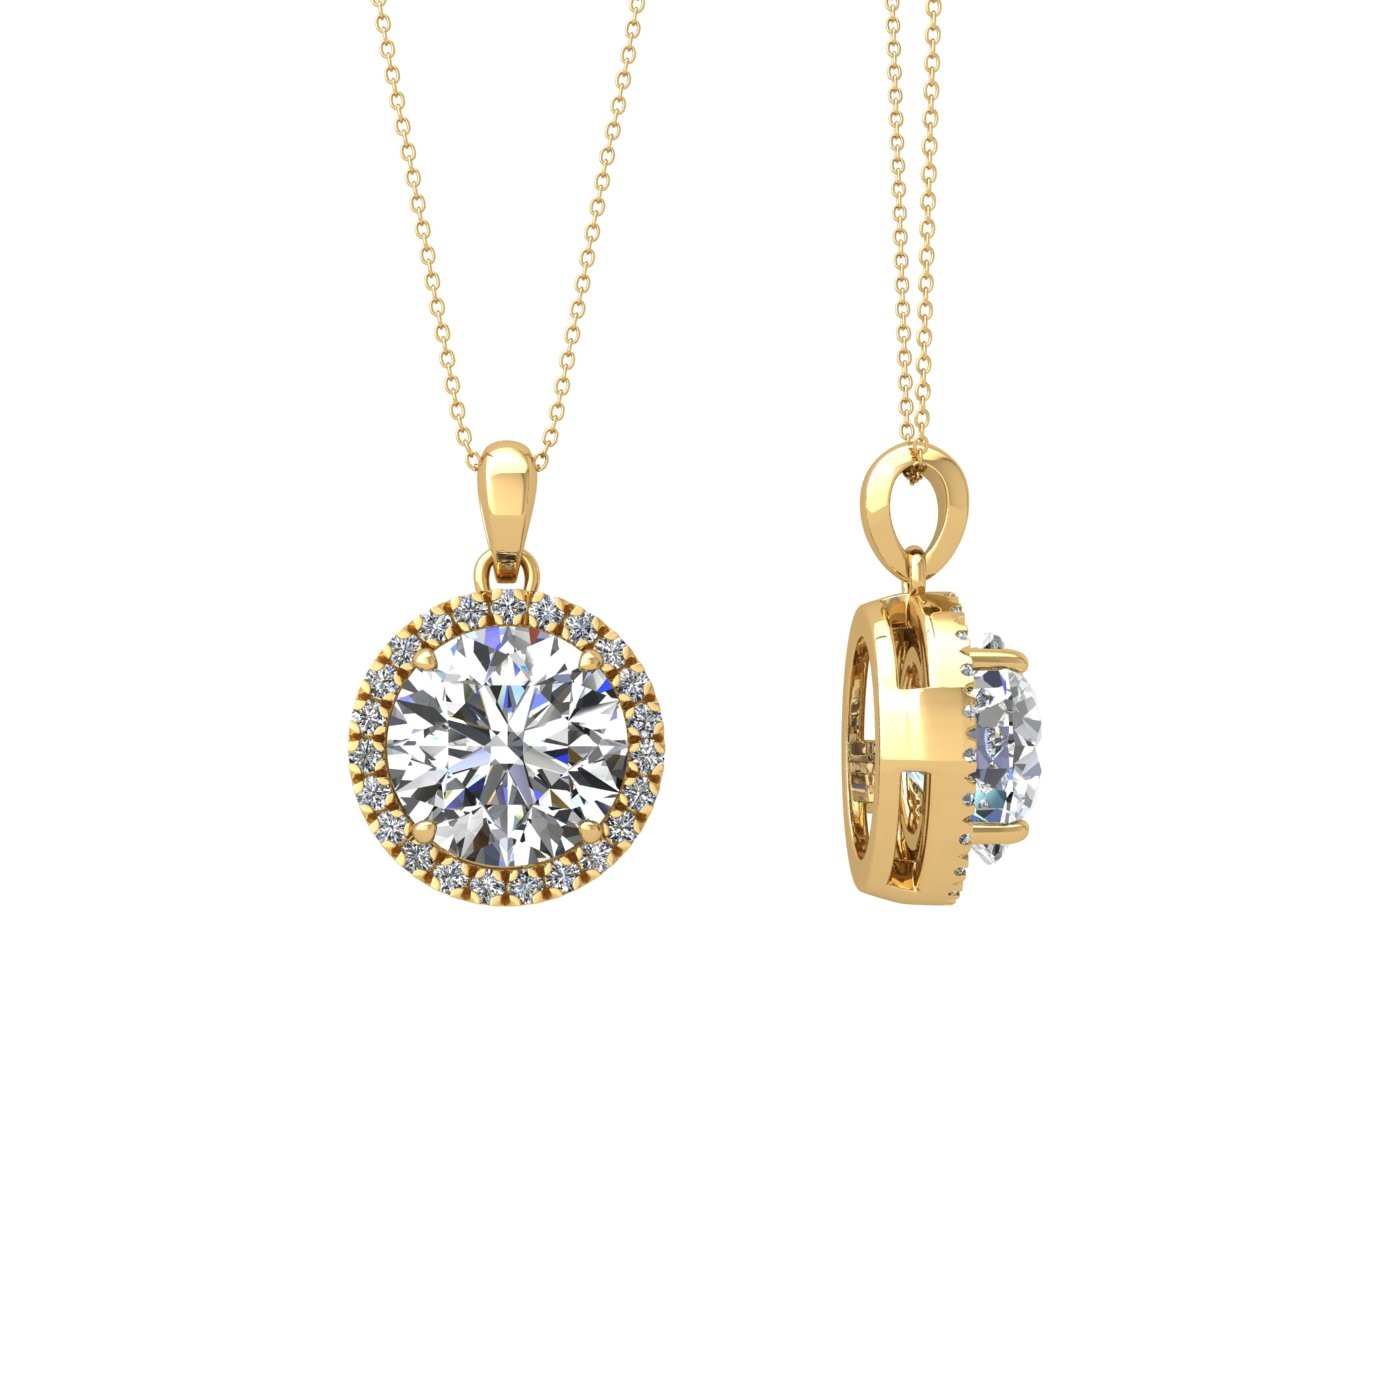 18k yellow gold  2 ct 4 prong round shape diamond pendant with diamond pavÉ set halo including chain seperate from the pendant Photos & images